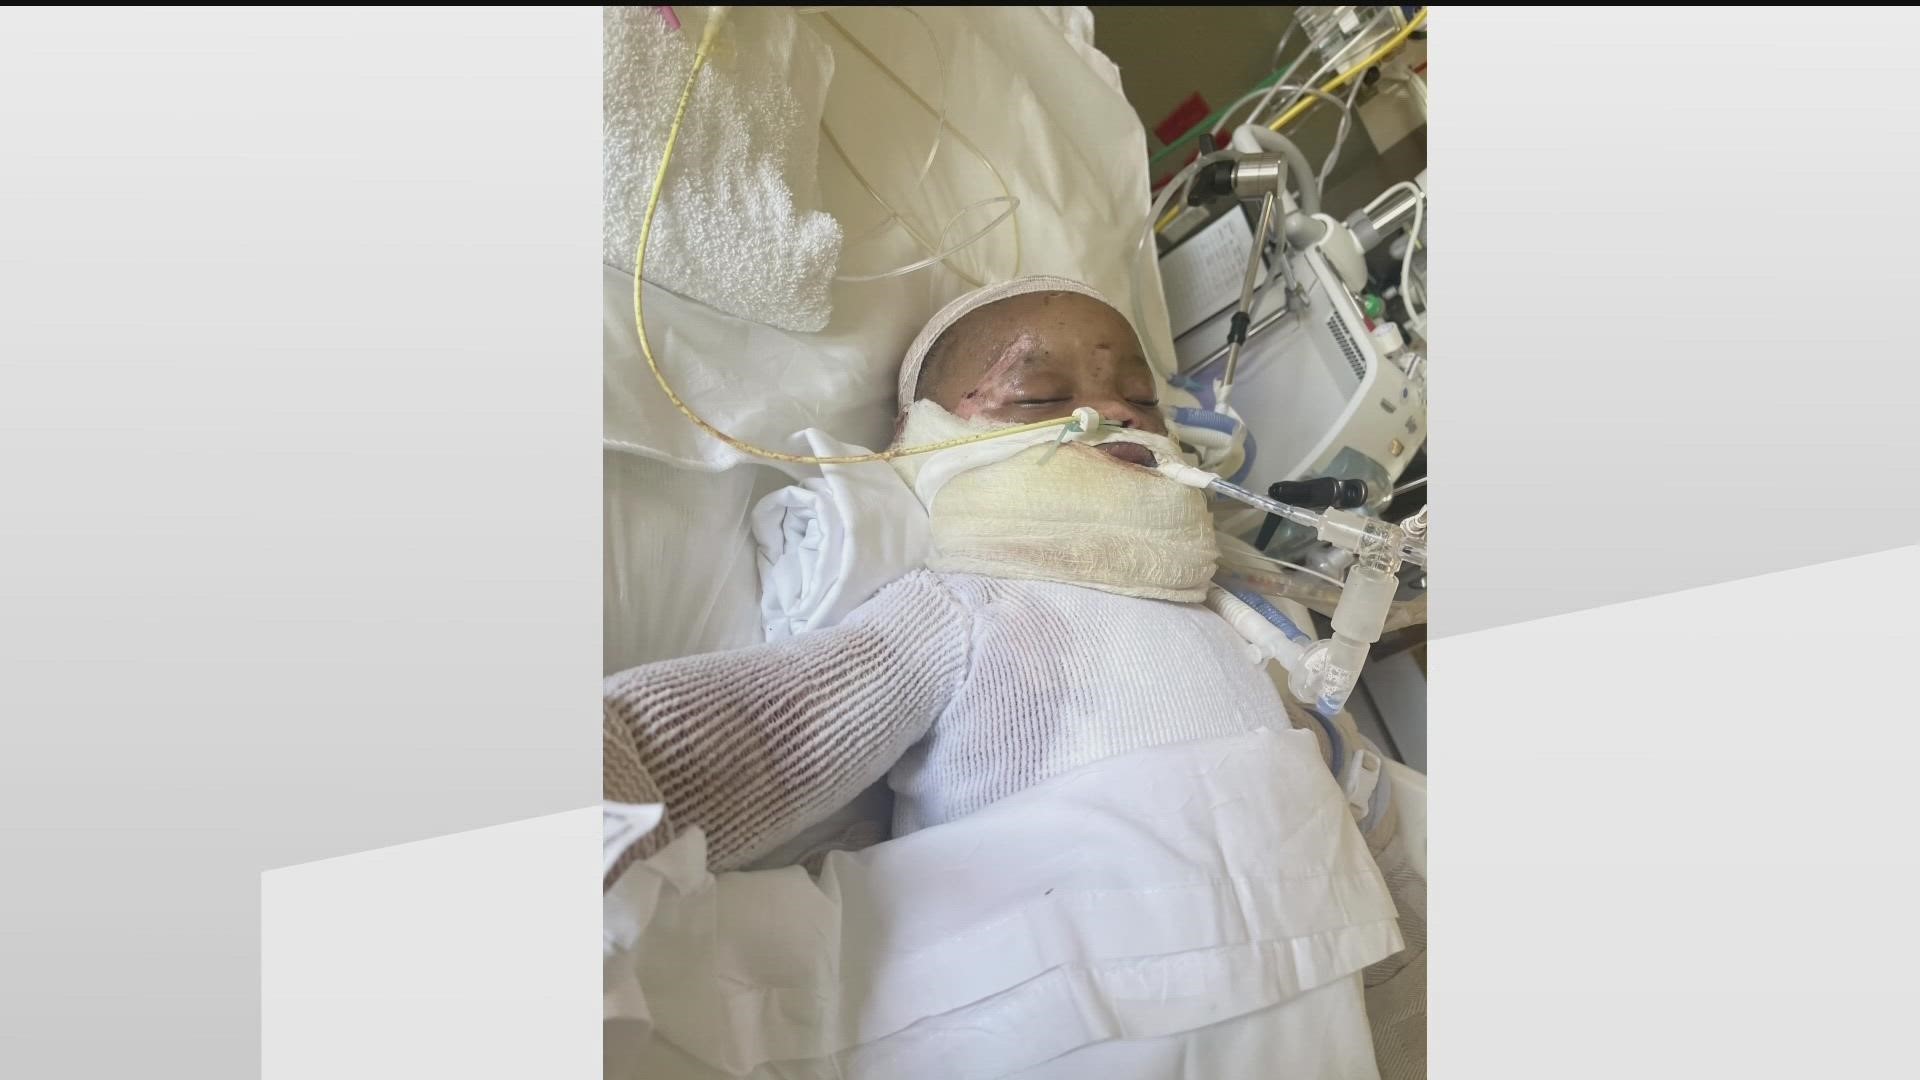 A freak accident left the Powder Springs child with burns on over 40% of his body.